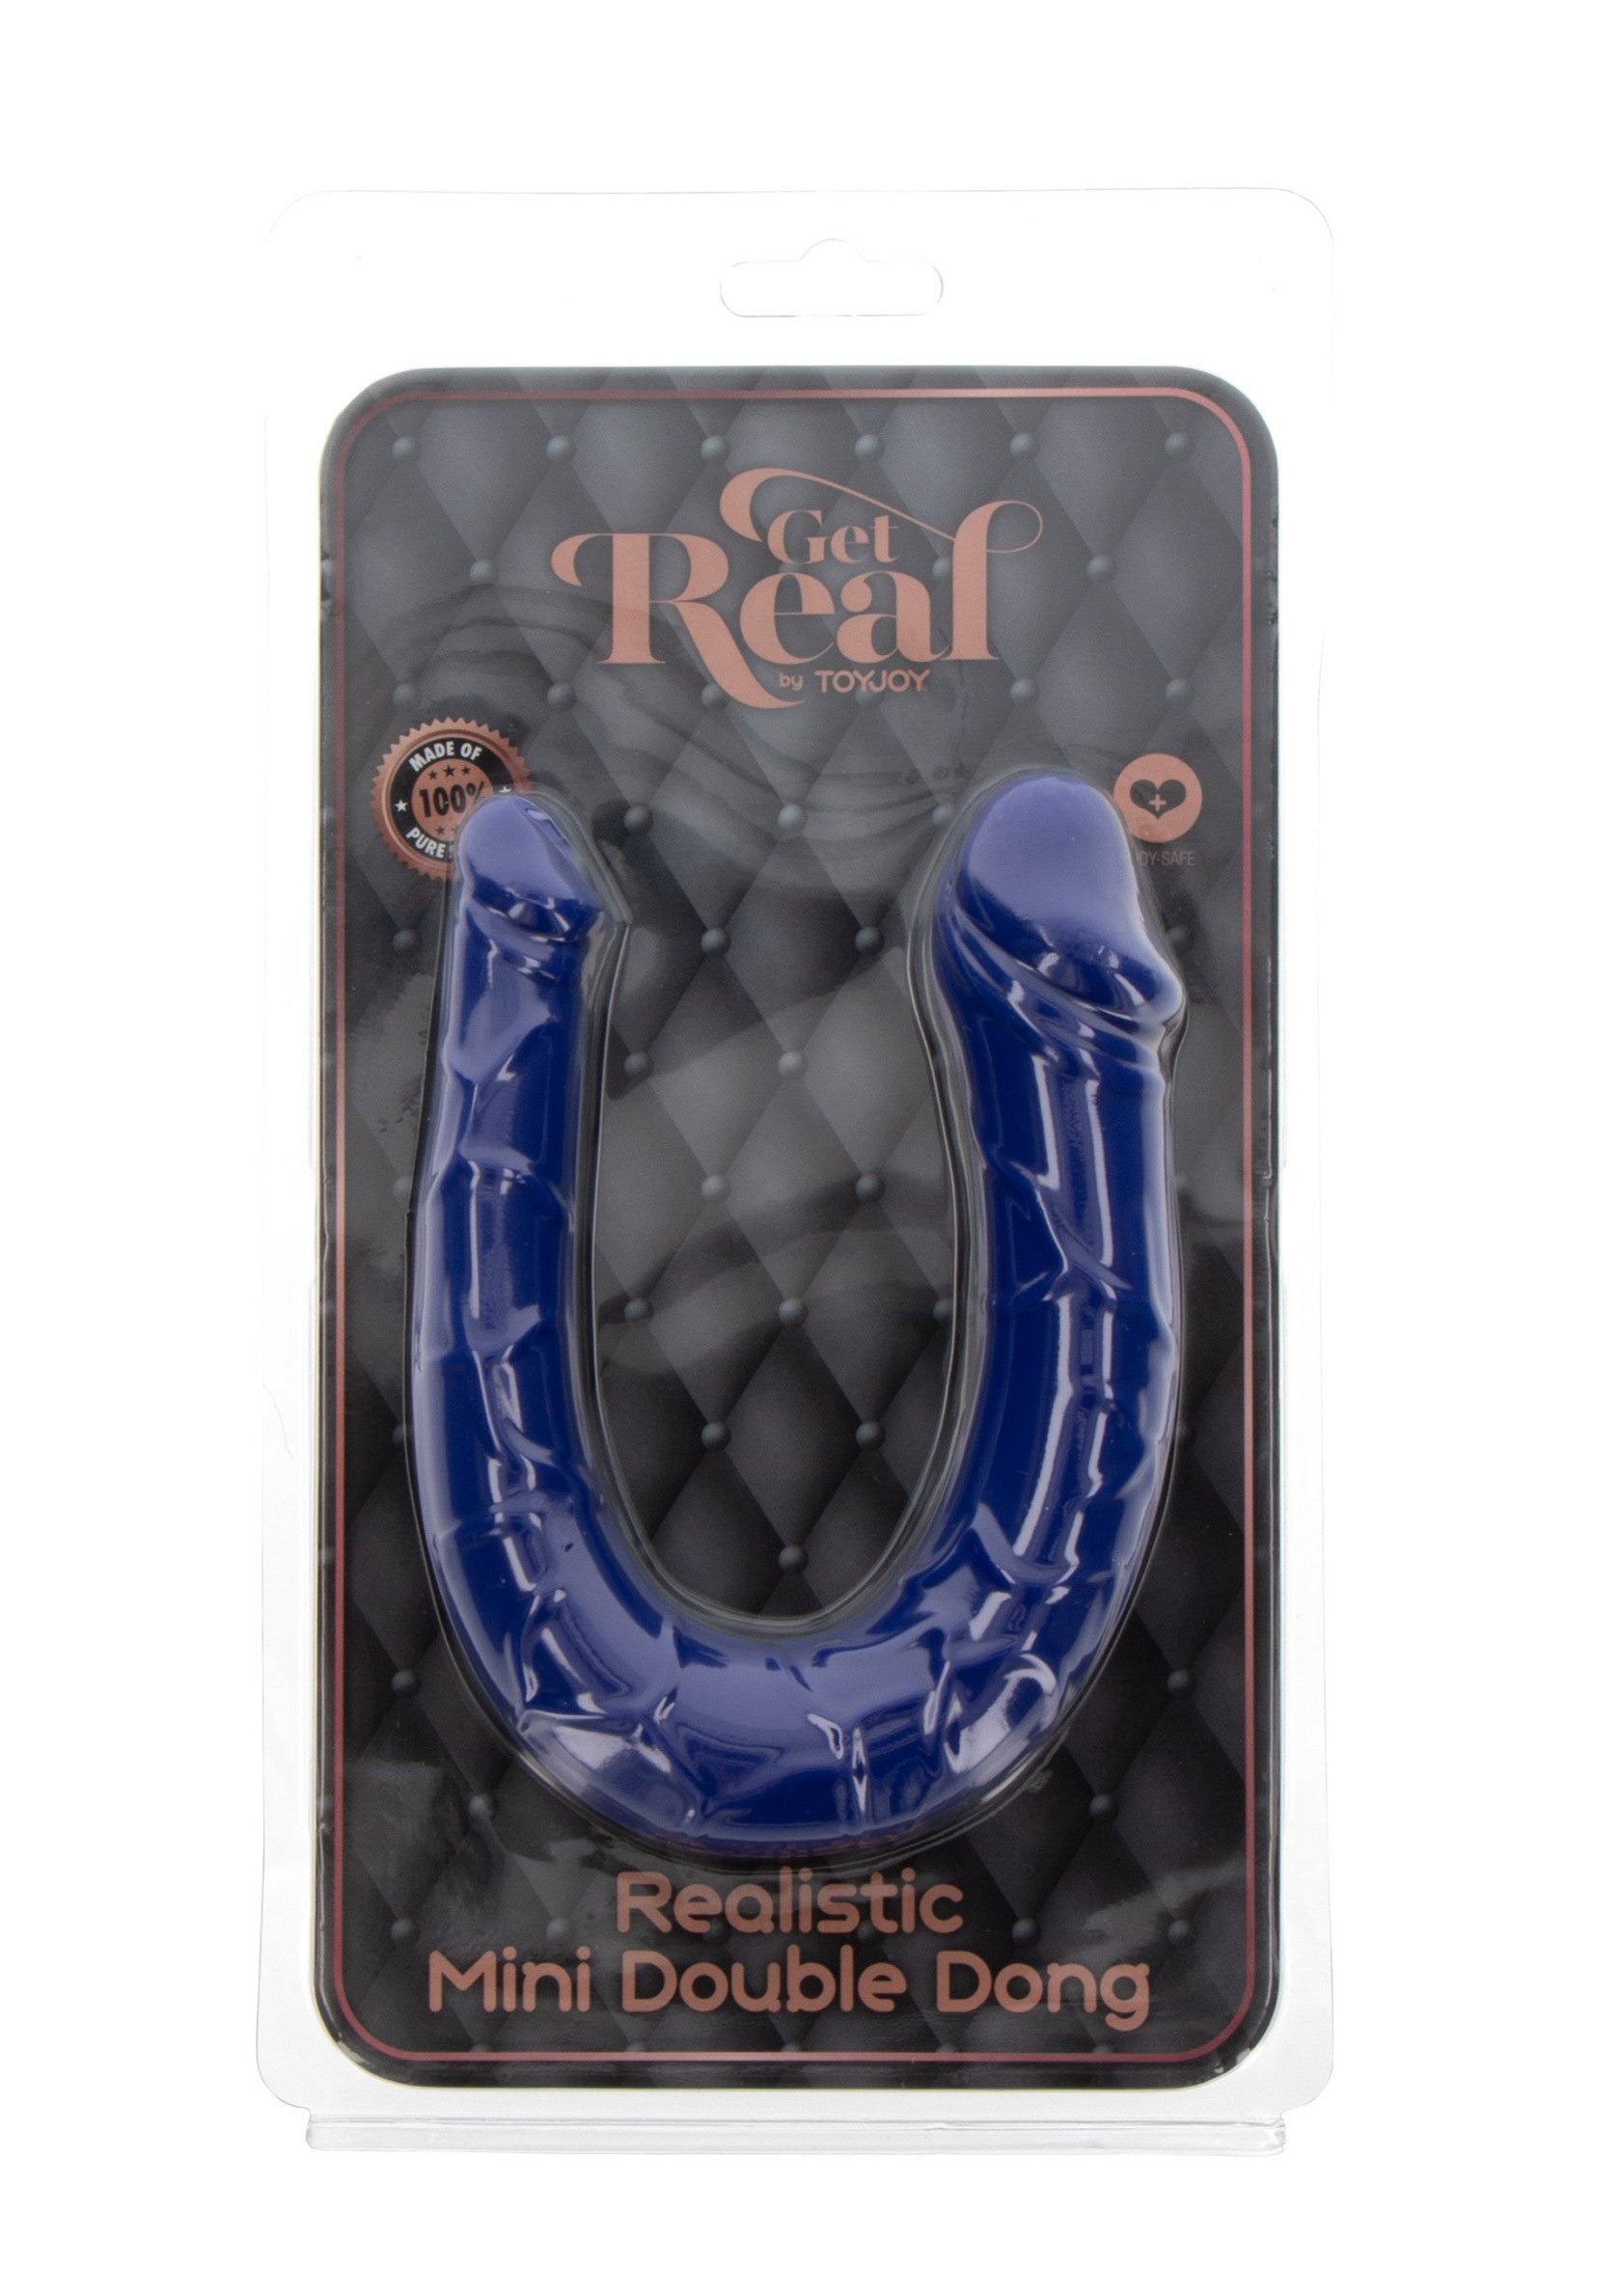 ToyJoy Get Real Realistic Mini Double Dong BLUE - 5